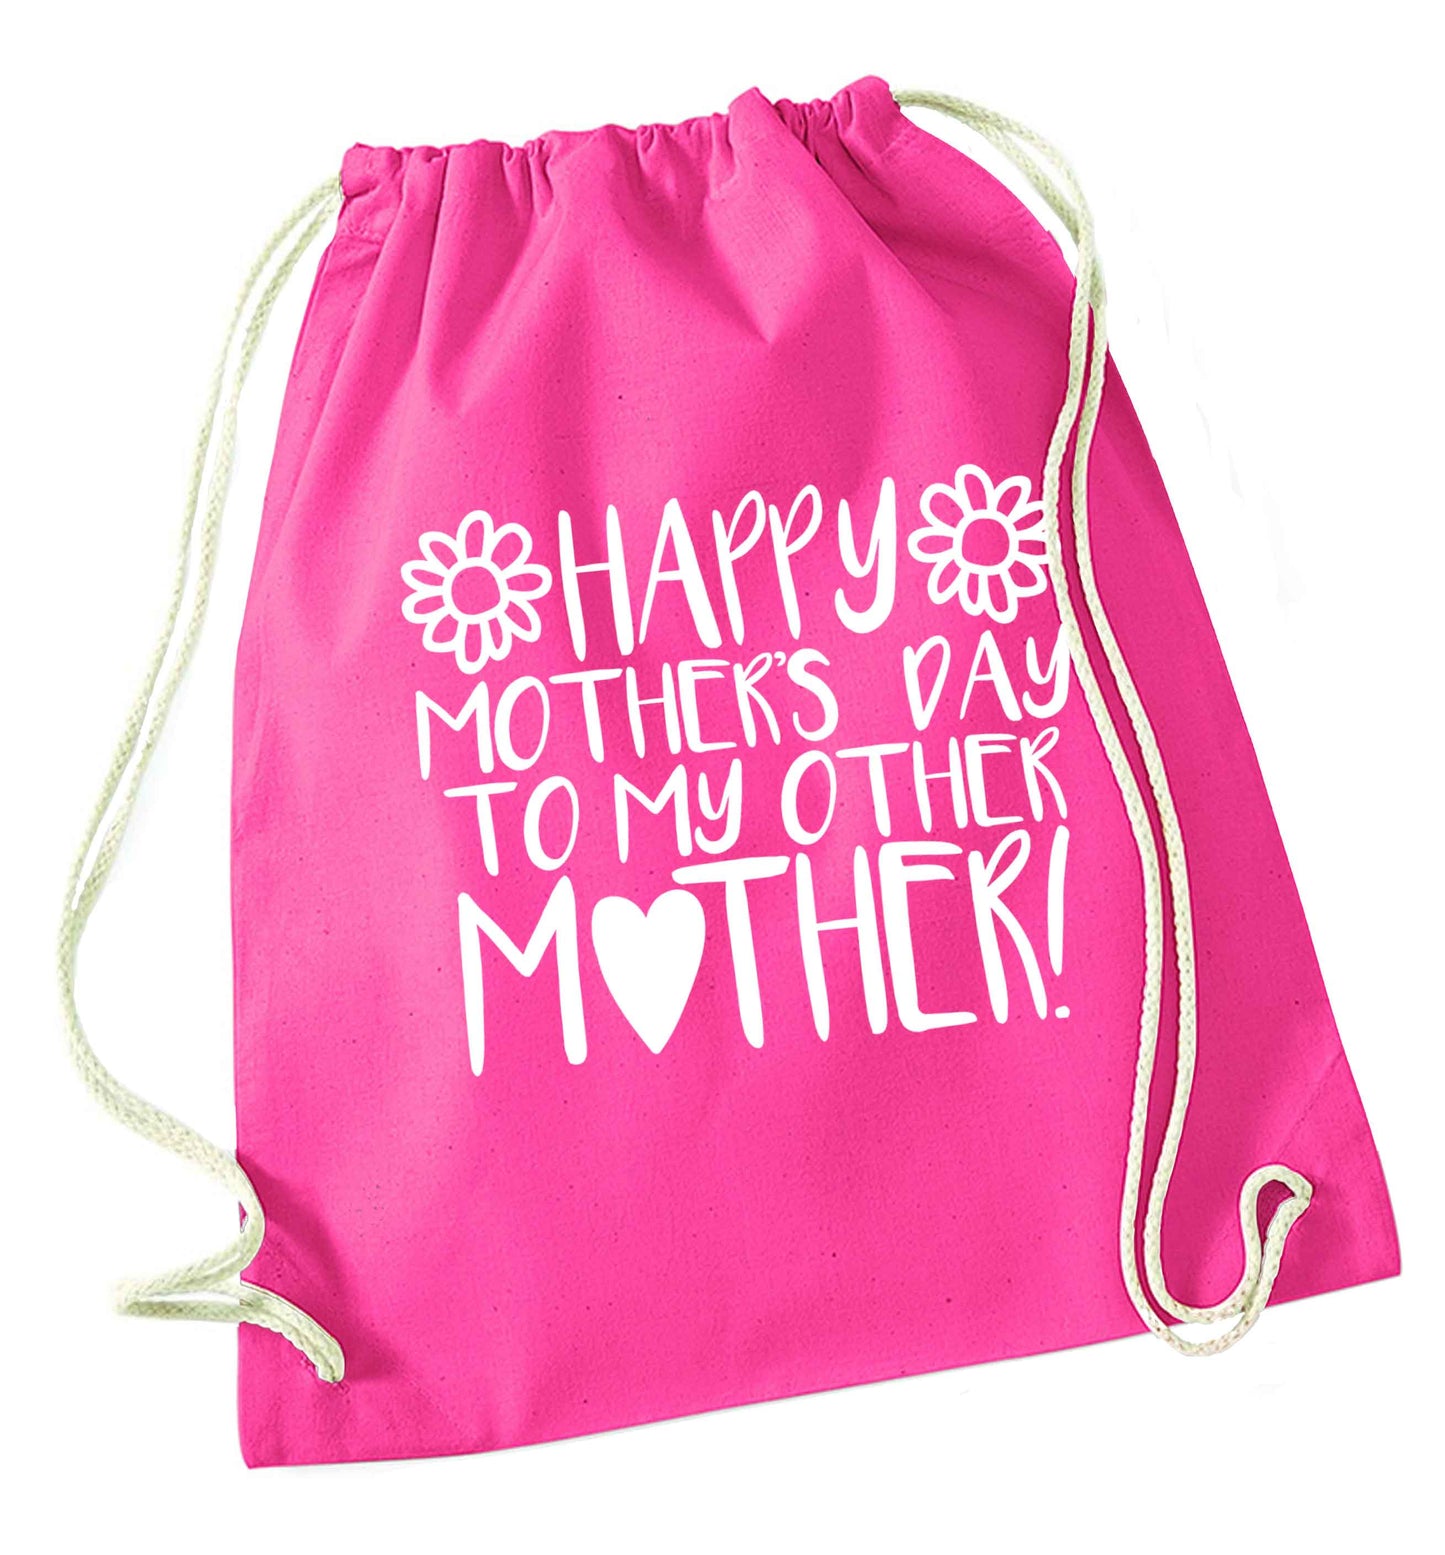 Happy mother's day to my other mother pink drawstring bag